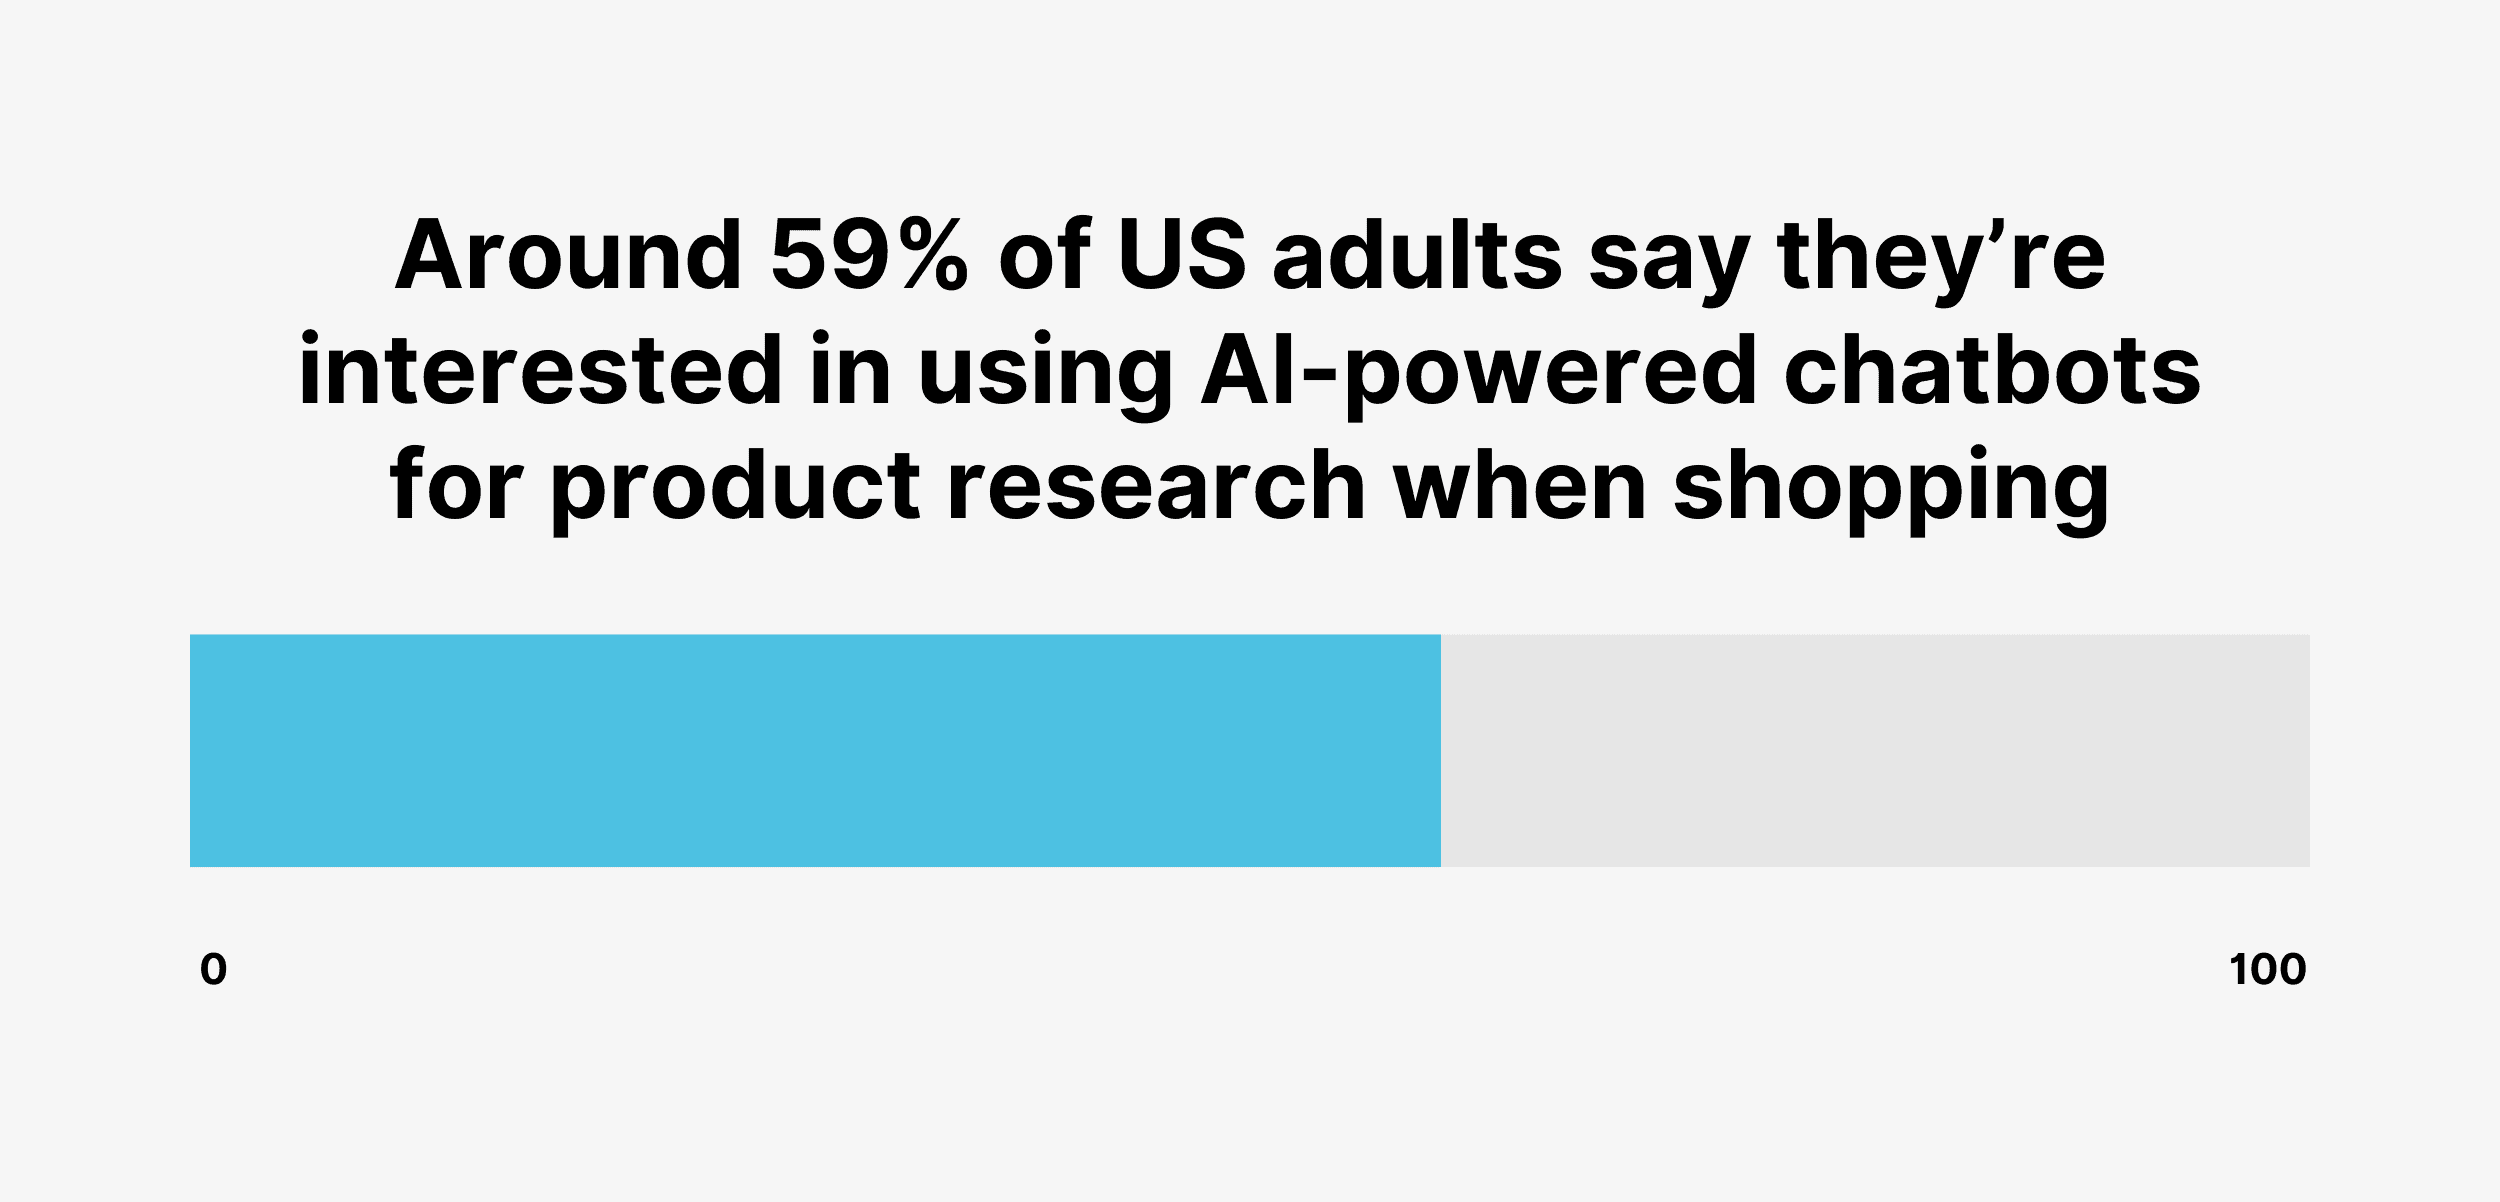 Around 59% of US adults say they’re interested in using AI-powered chatbots for product research when shopping